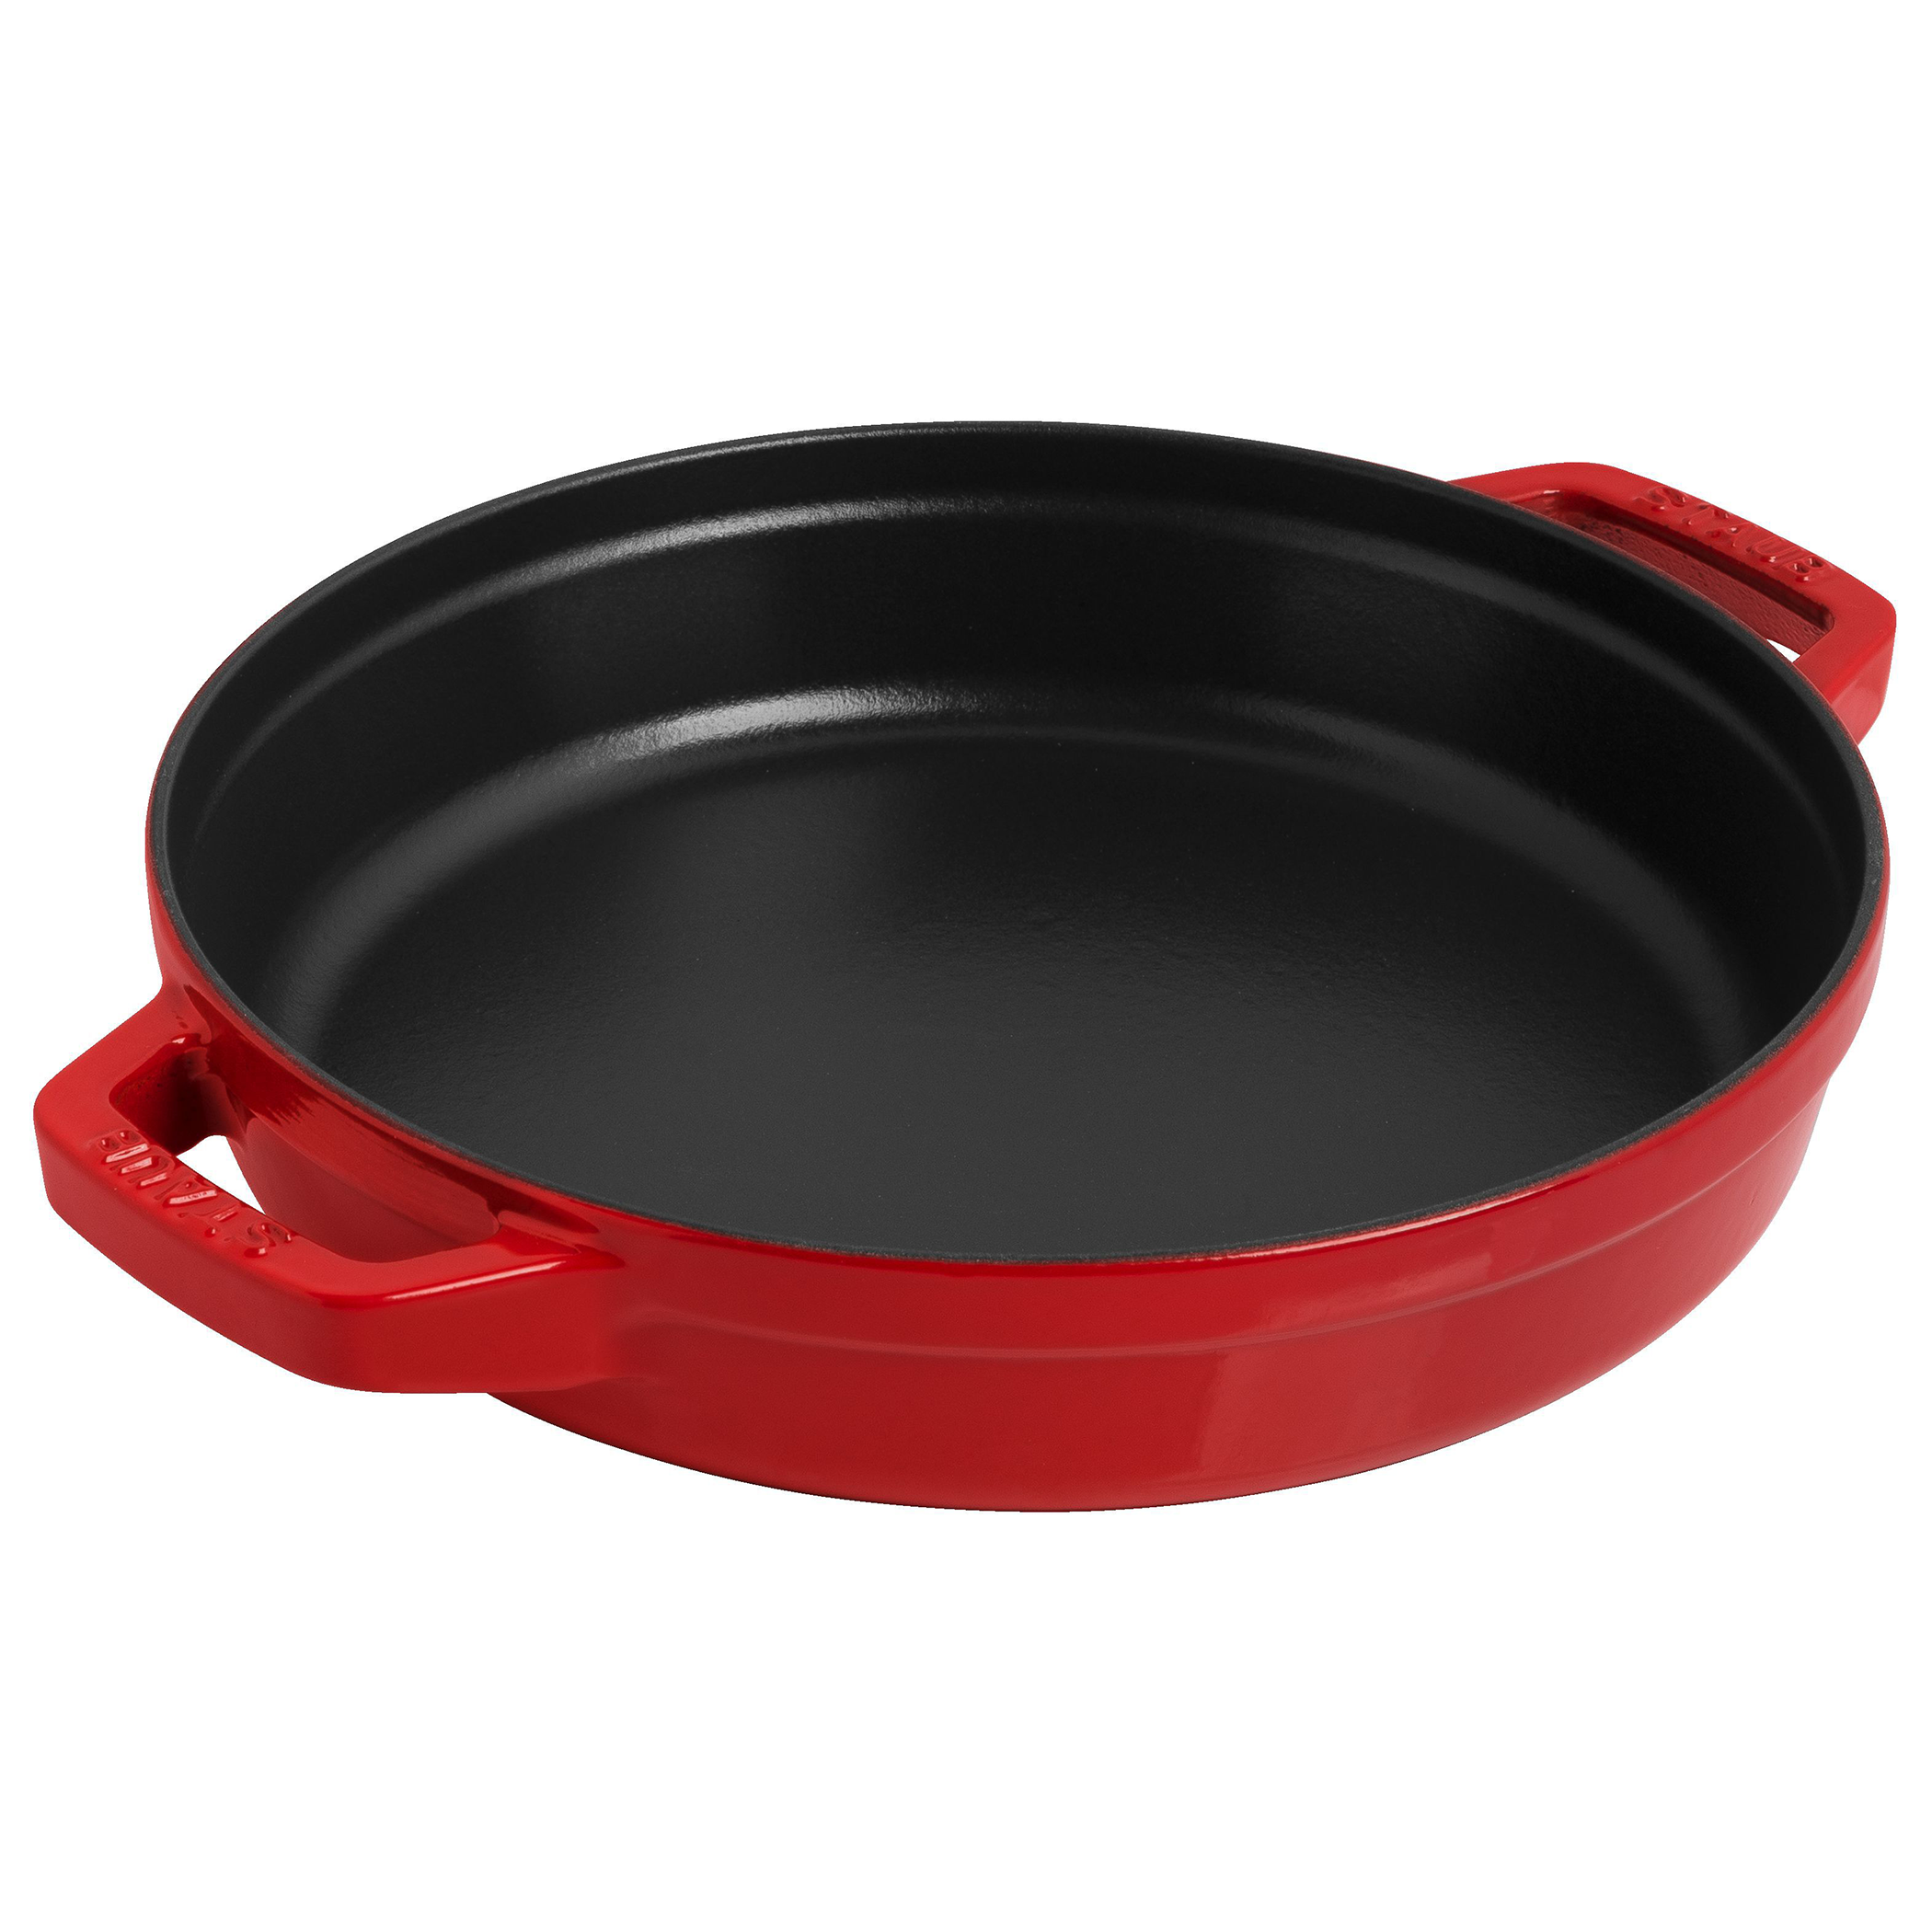 Staub Stackables Have Arrived In Canada